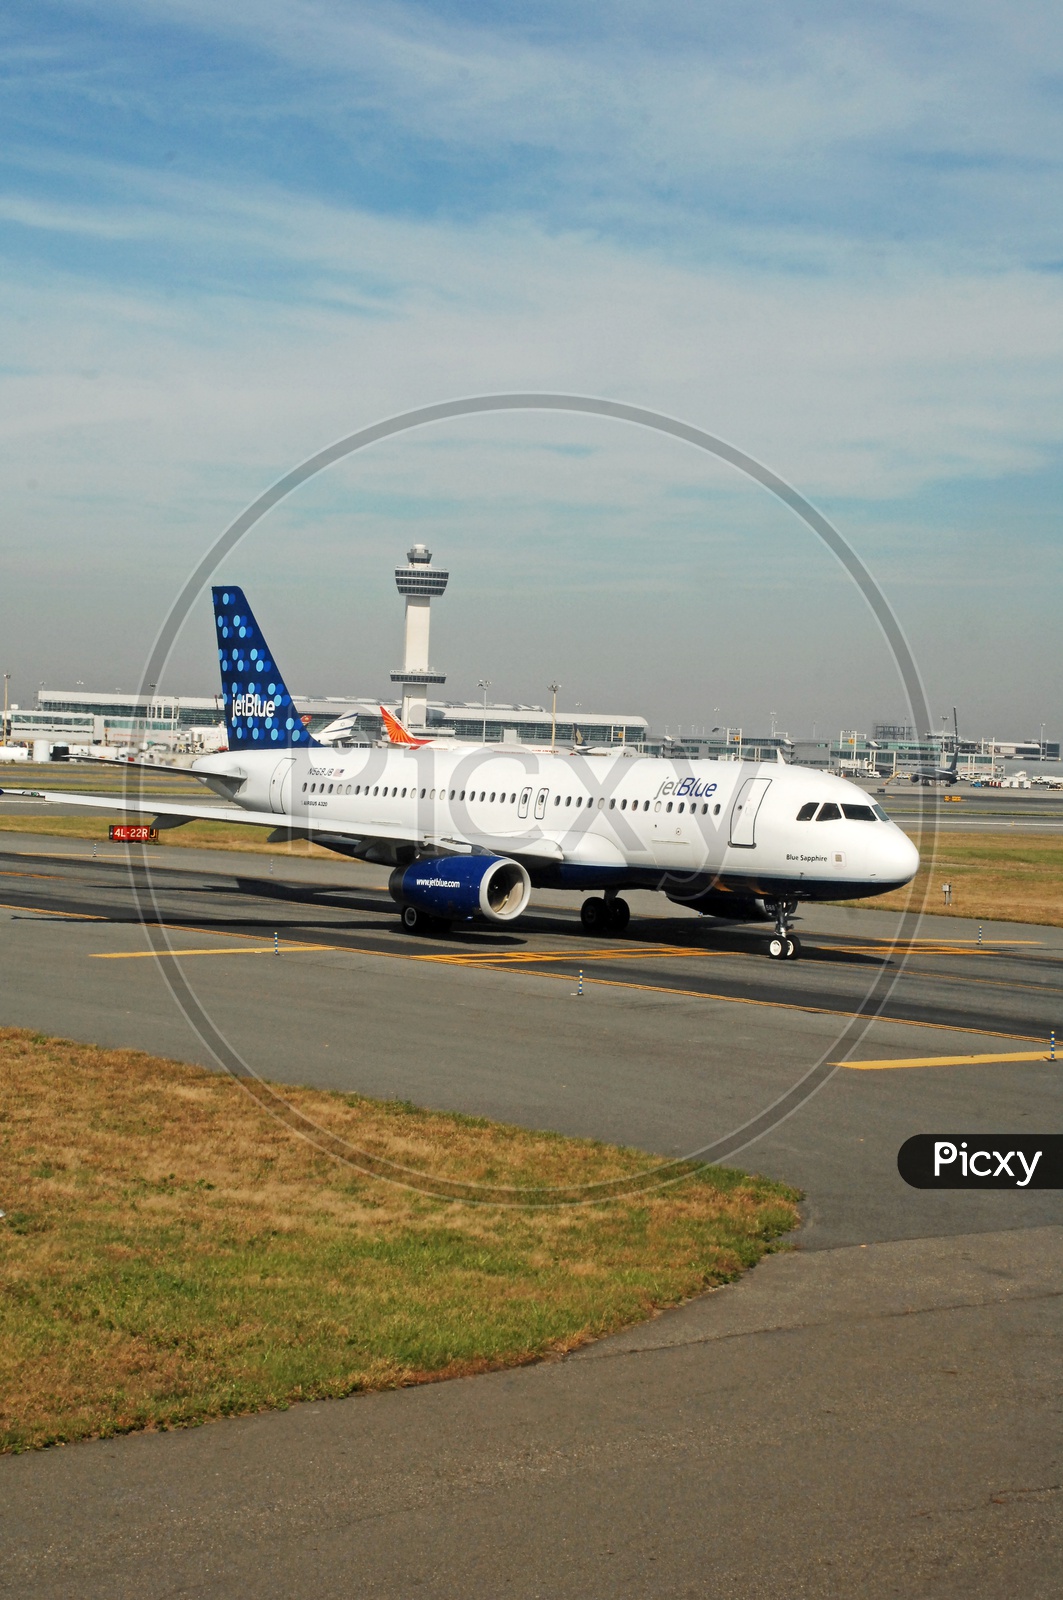 JetBlue Plane On Runway of an Airport